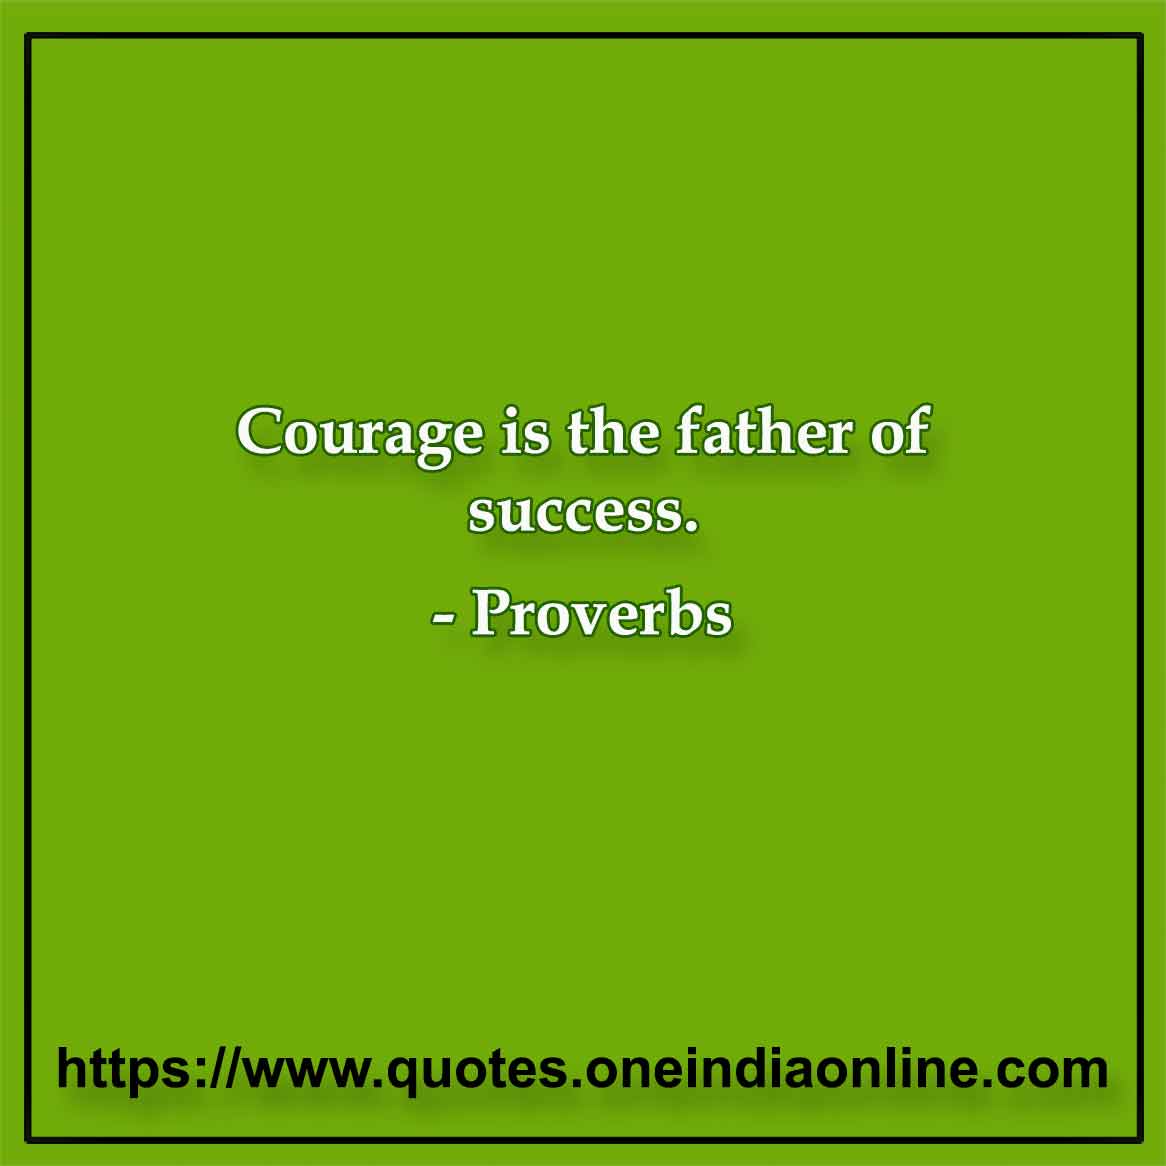 Courage is the father of success.

Nigerian Proverbs 